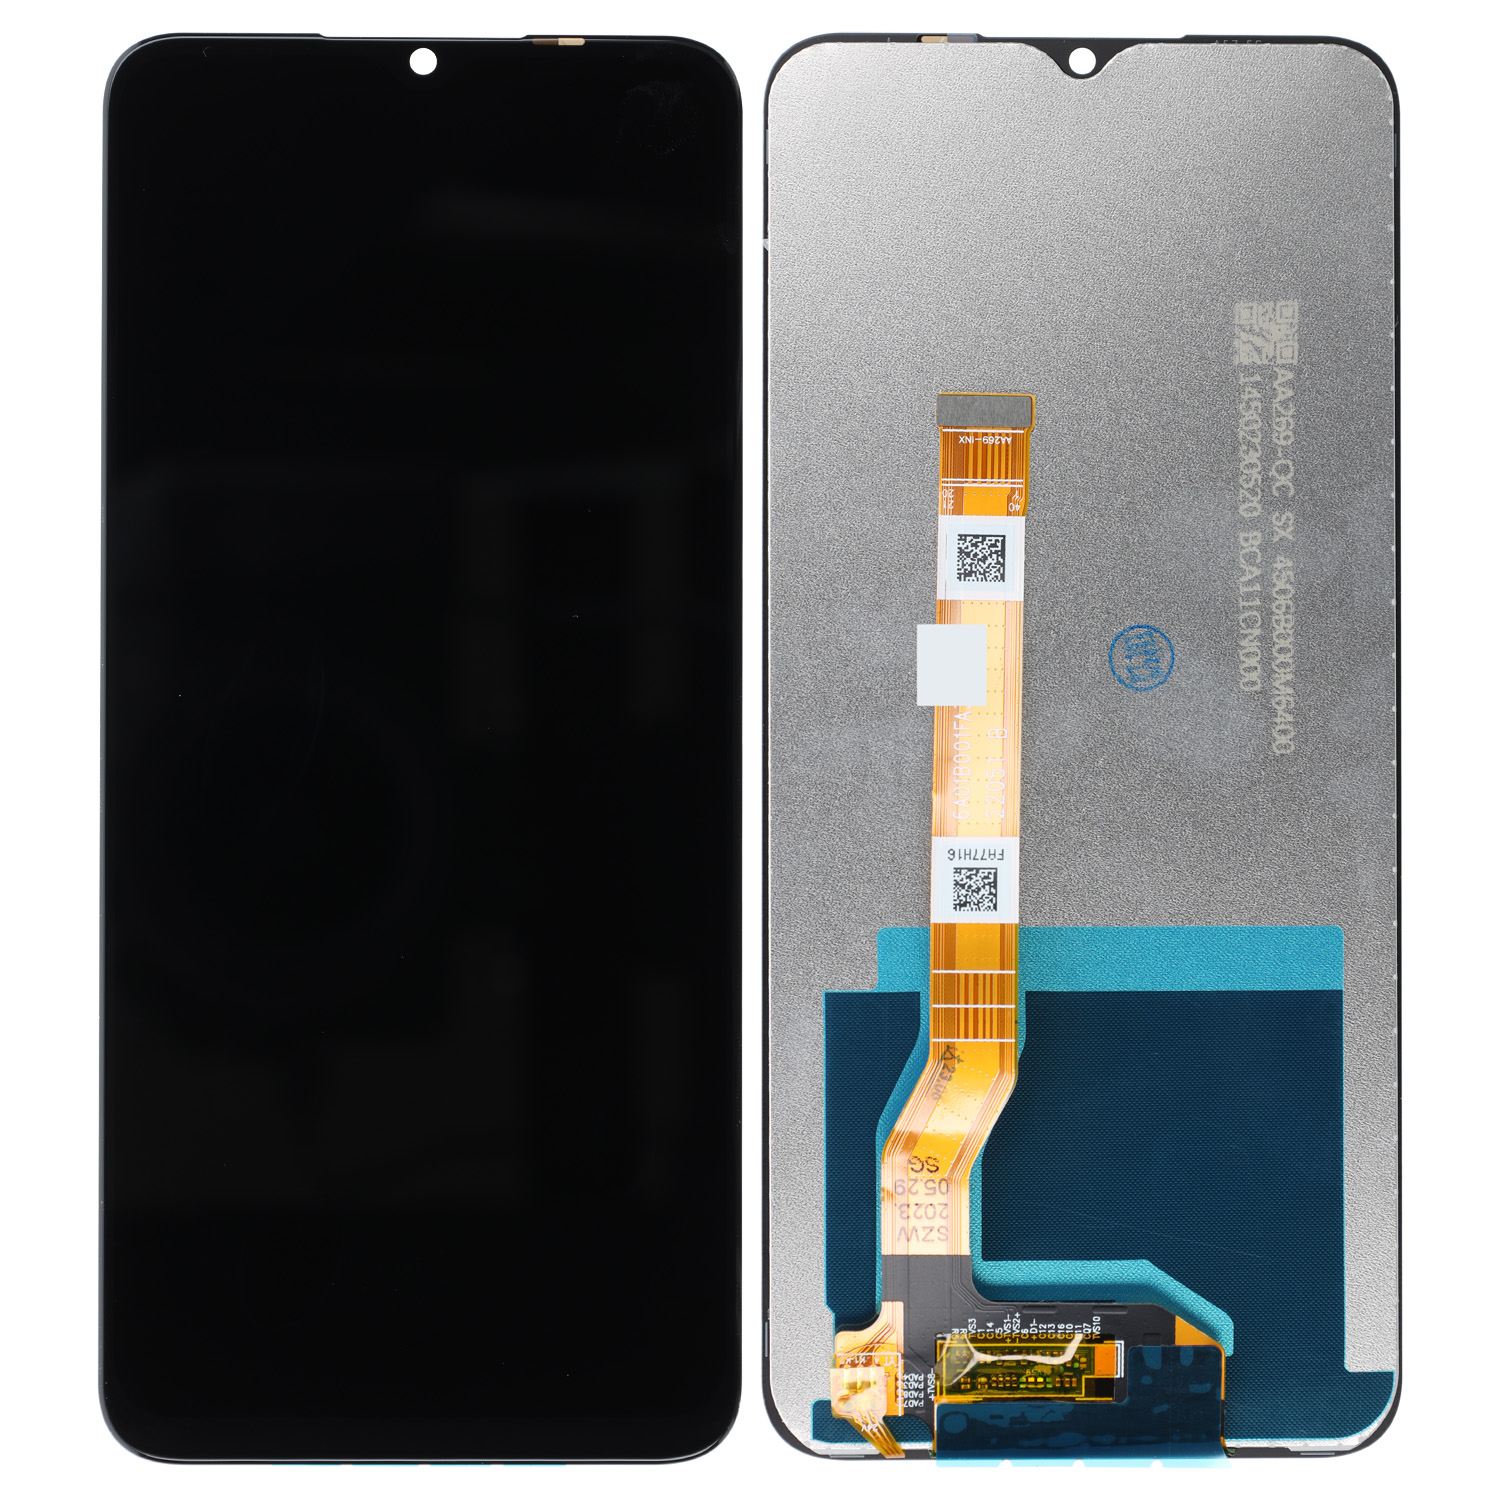 LCD Display commpatibel mit Oppo A57, A57s, A77, A57e, A17  ohne Rahmen